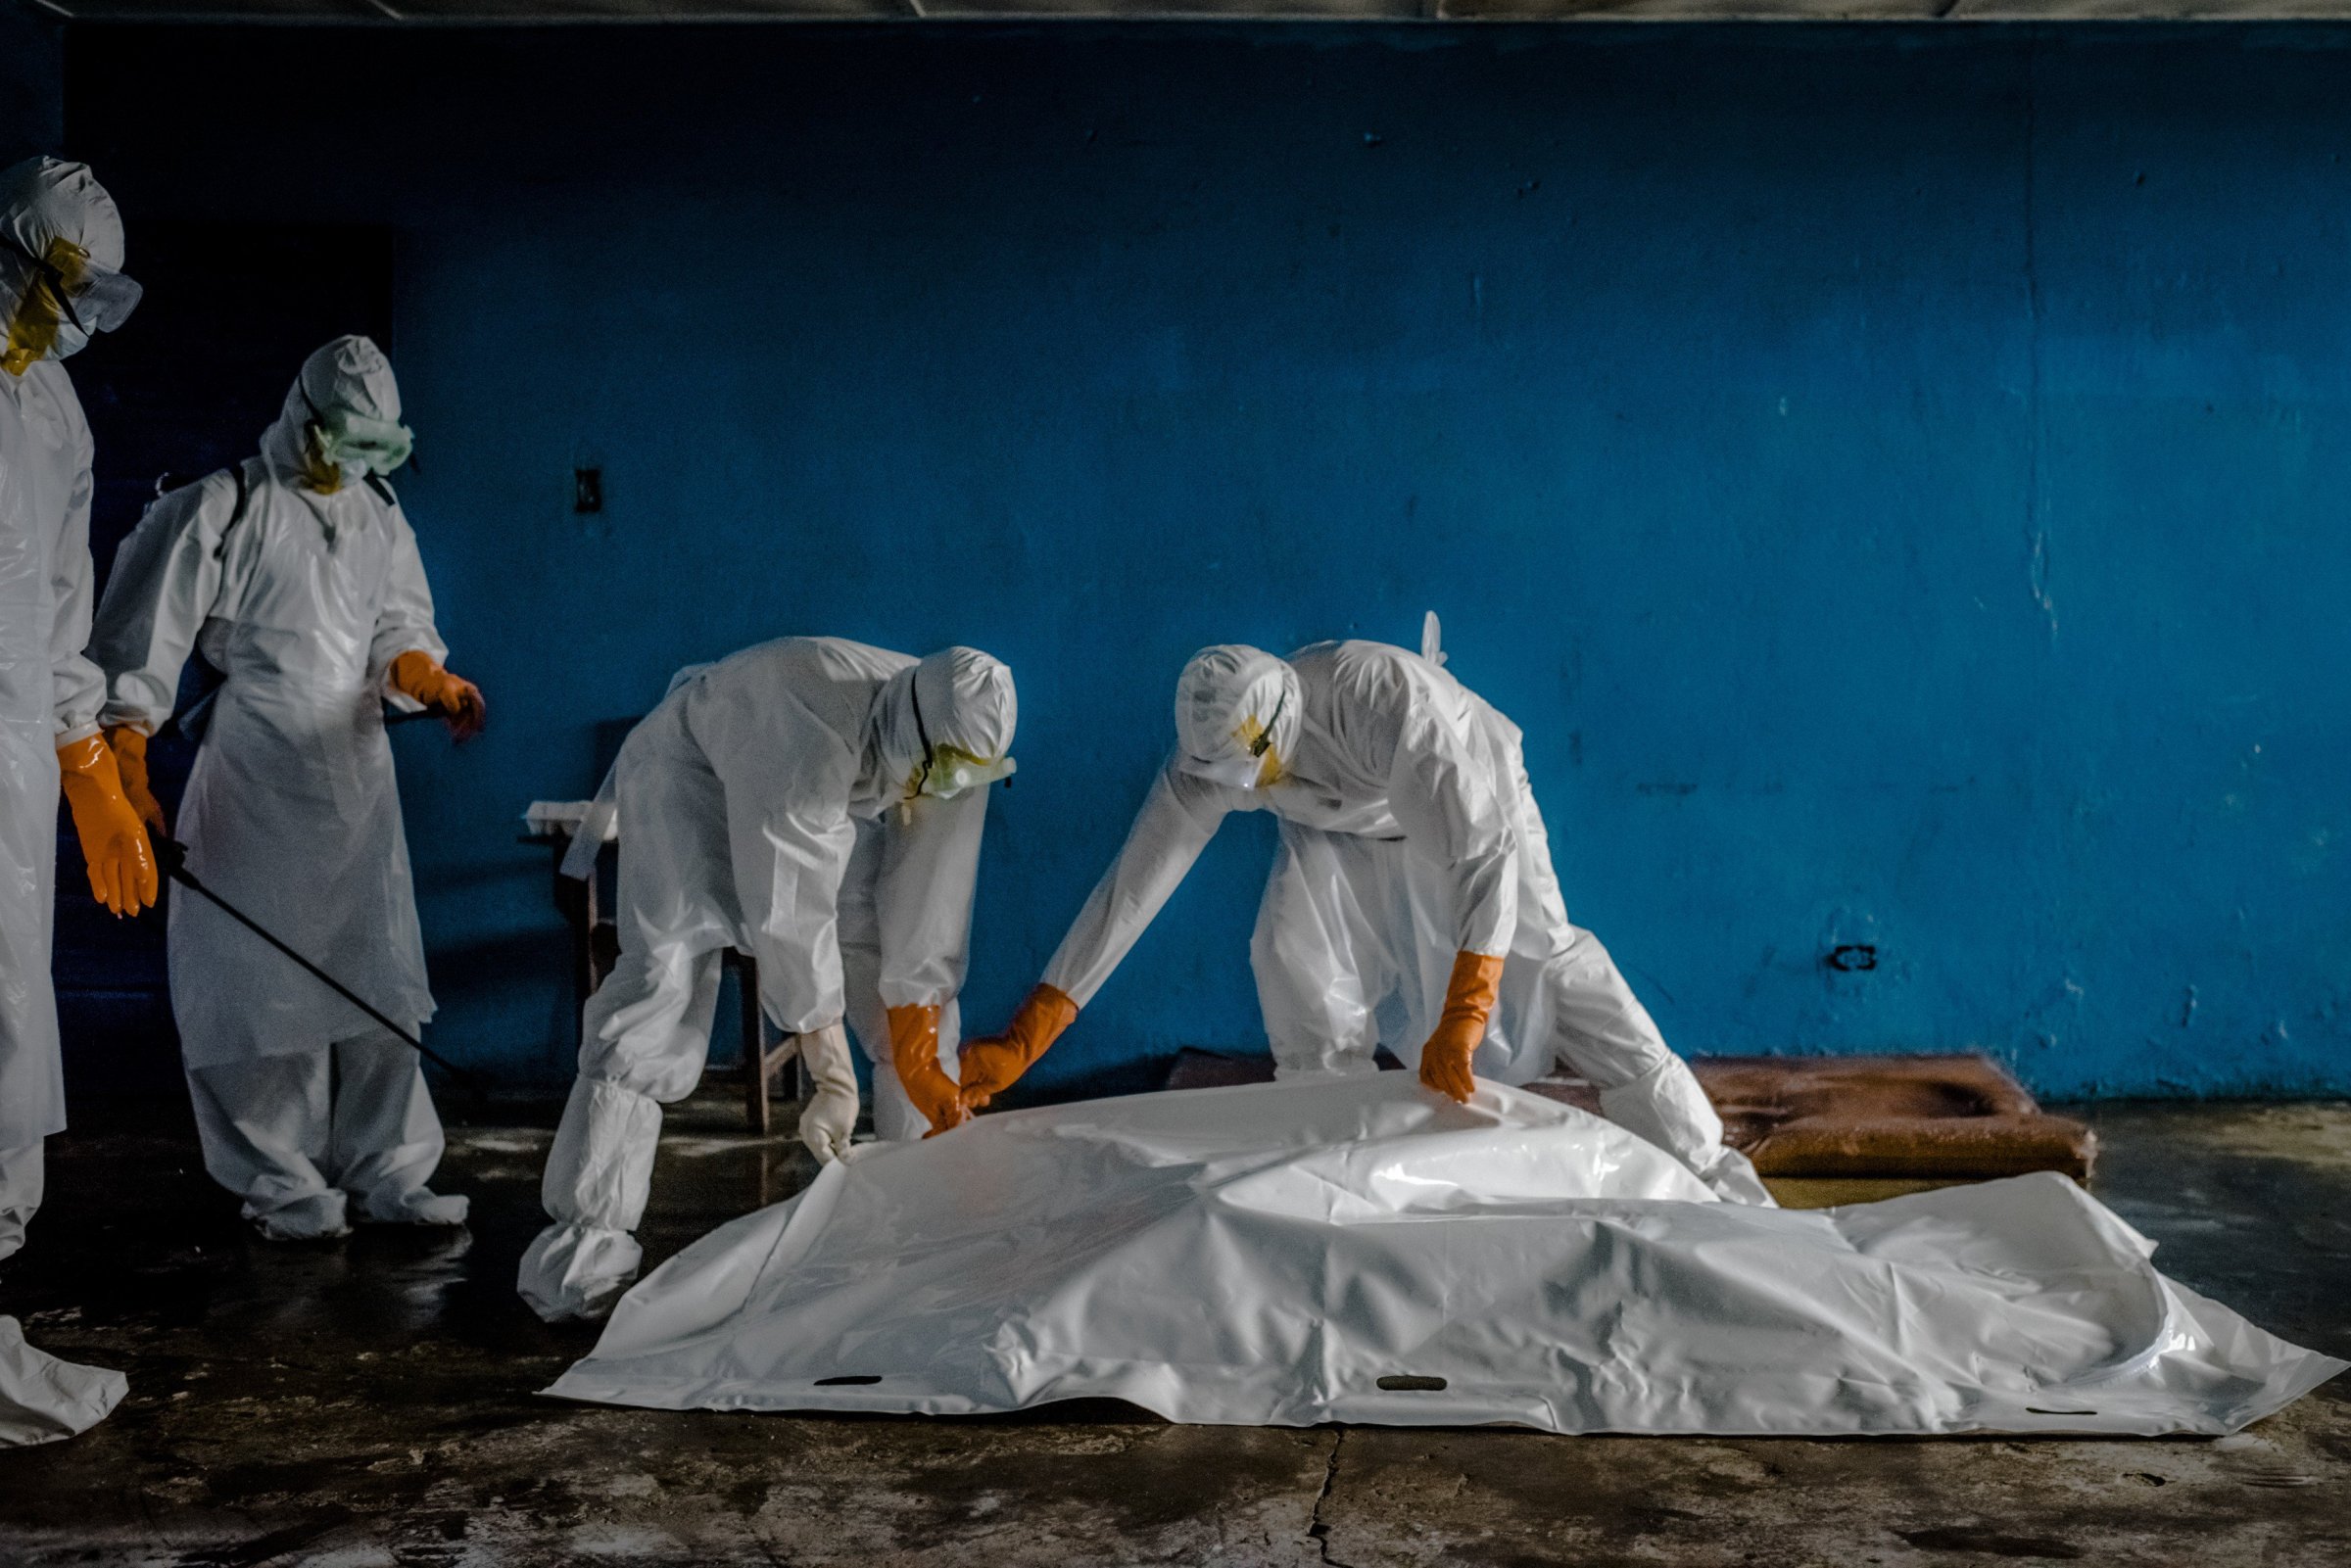 A burial team in protective clothing retrieves the body of an Ebola victim from an isolation ward in the West Point neighborhood of Monrovia, the capital of Liberia on Aug. 28, 2014.